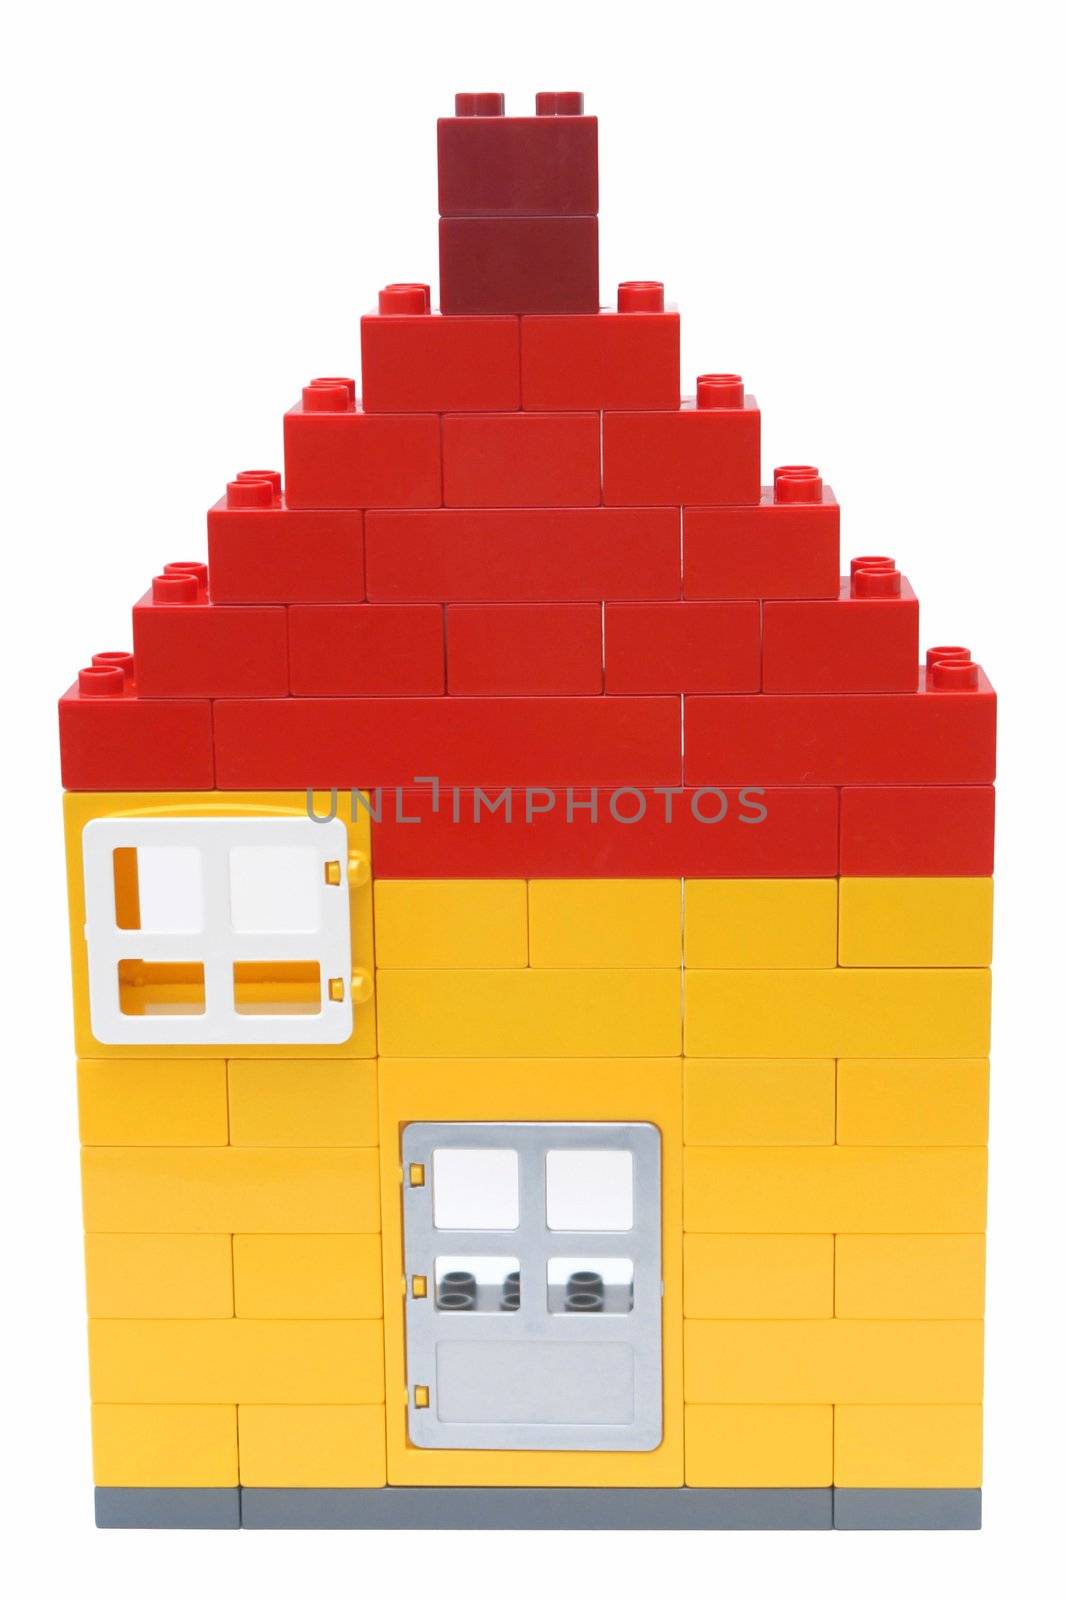 A house made of blocks